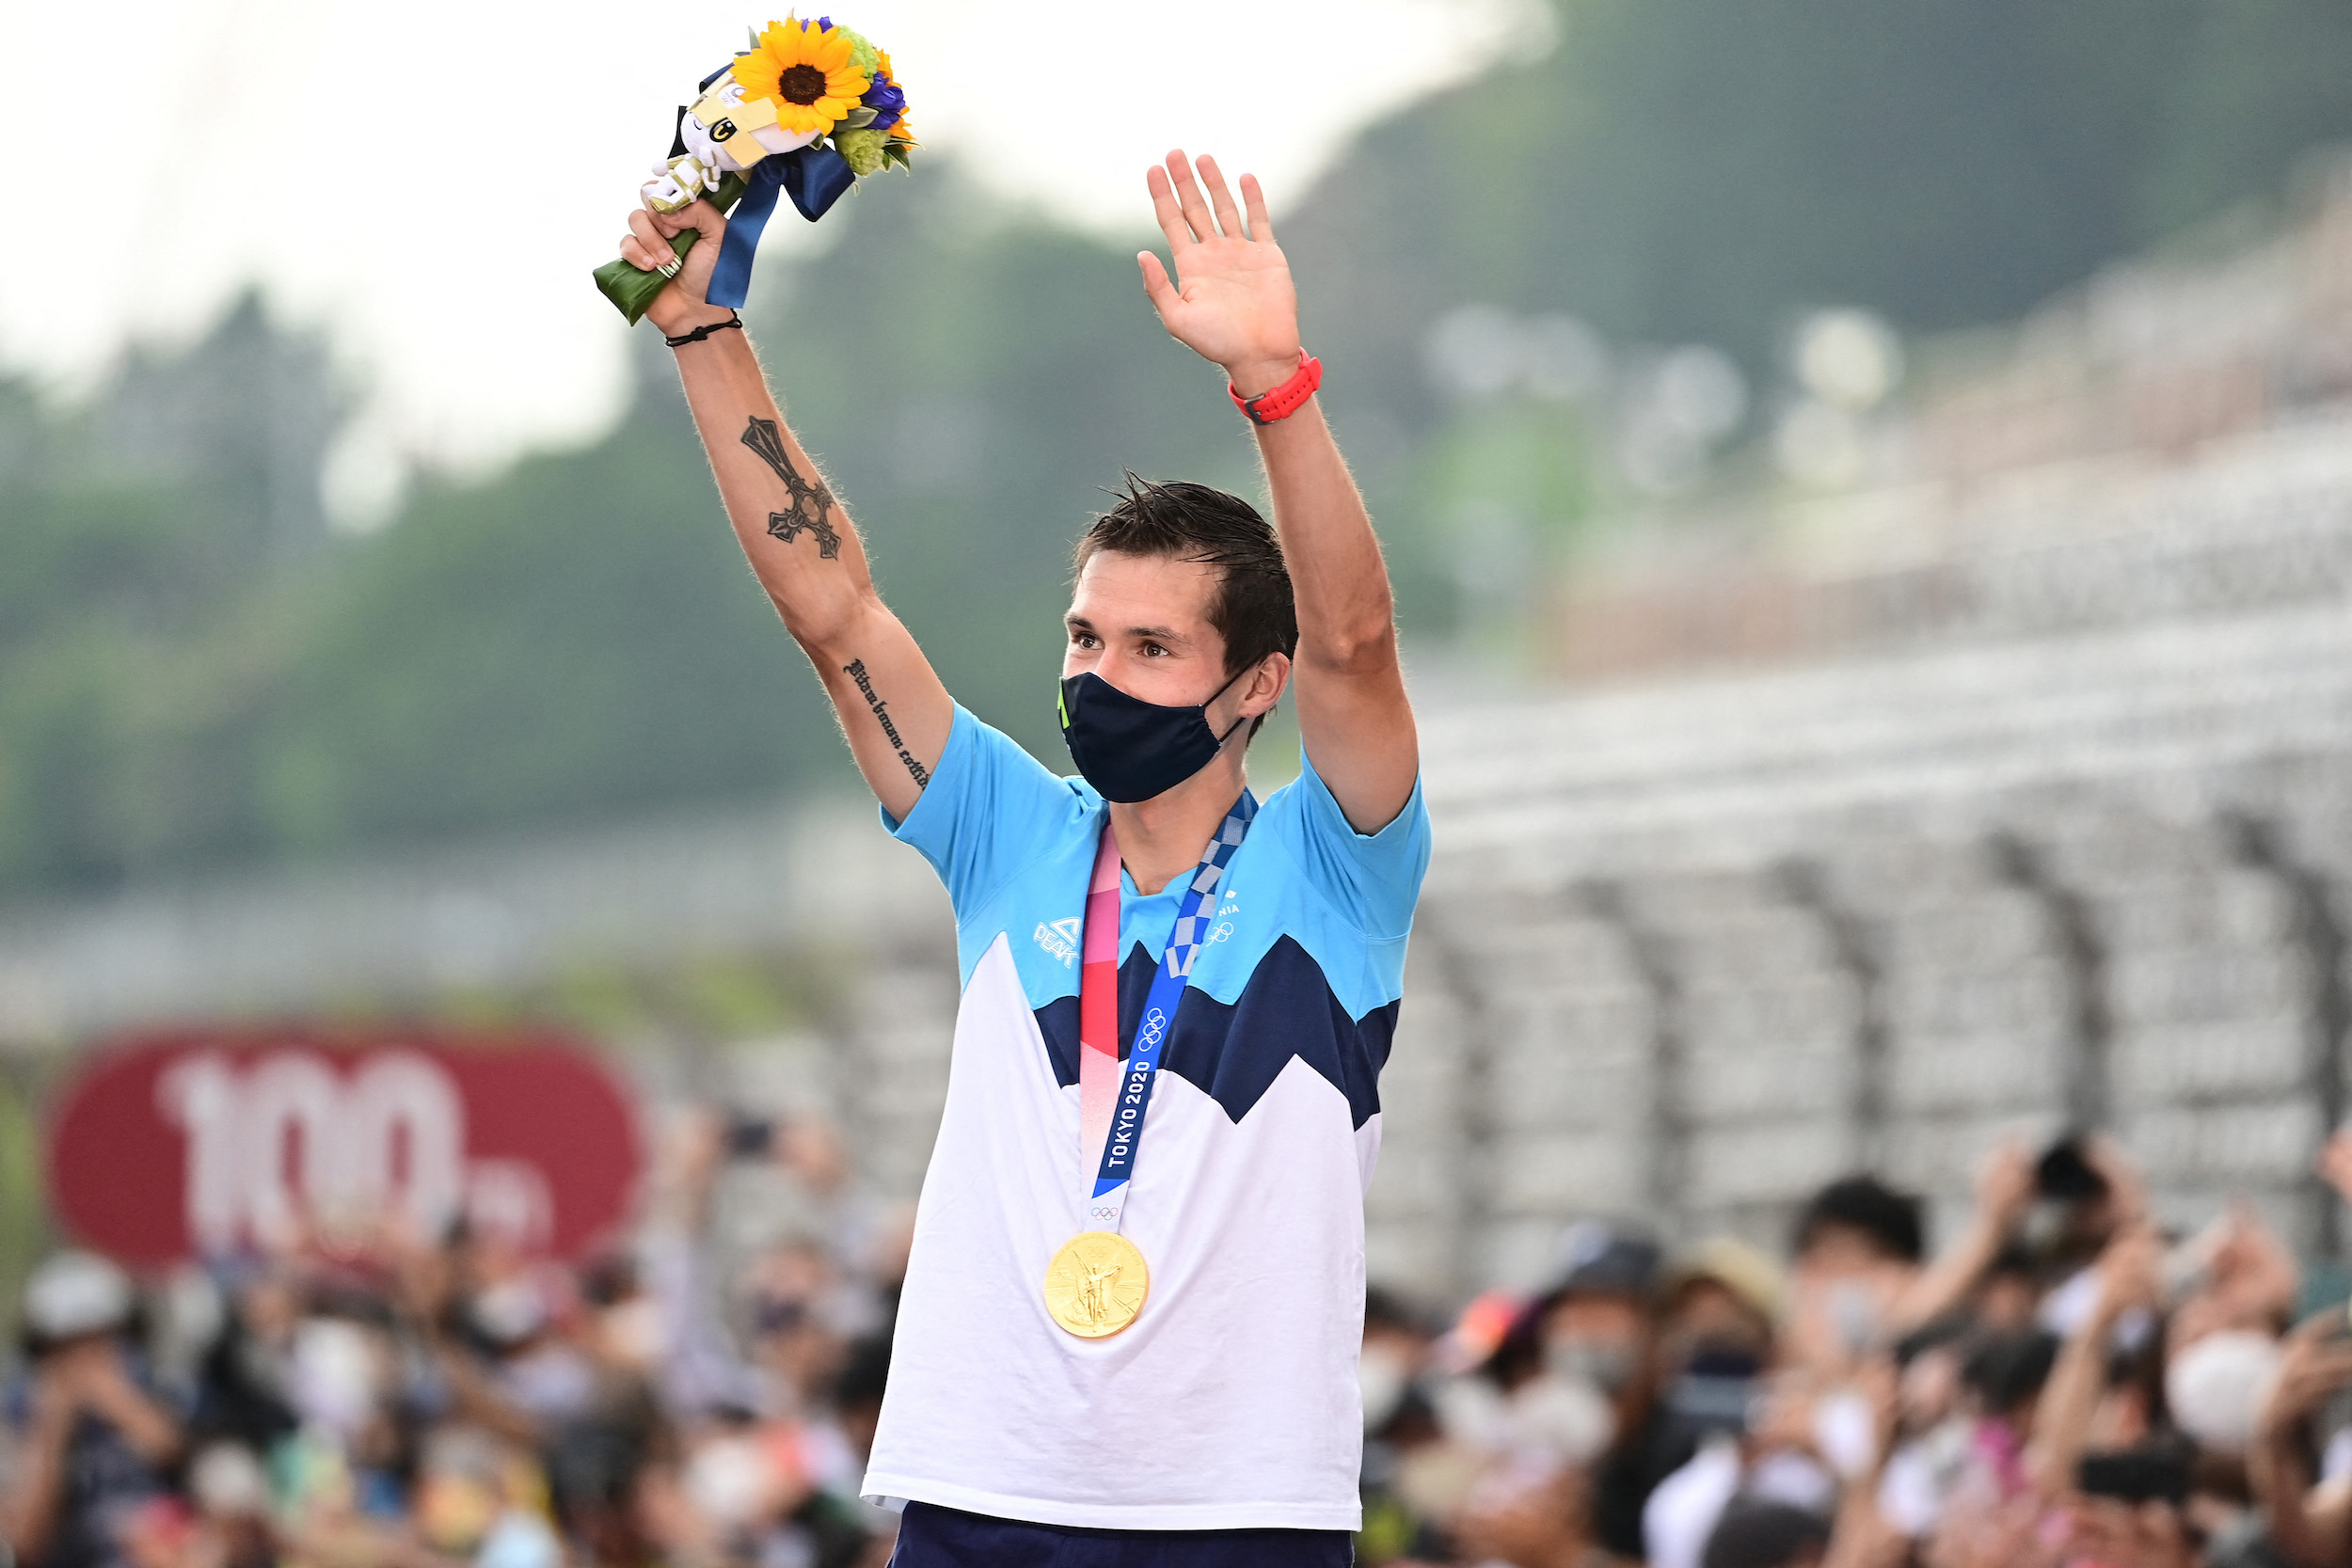 Primož Roglič with his gold medal after winning the individual time trial at the Tokyo 2020 Olympic Games